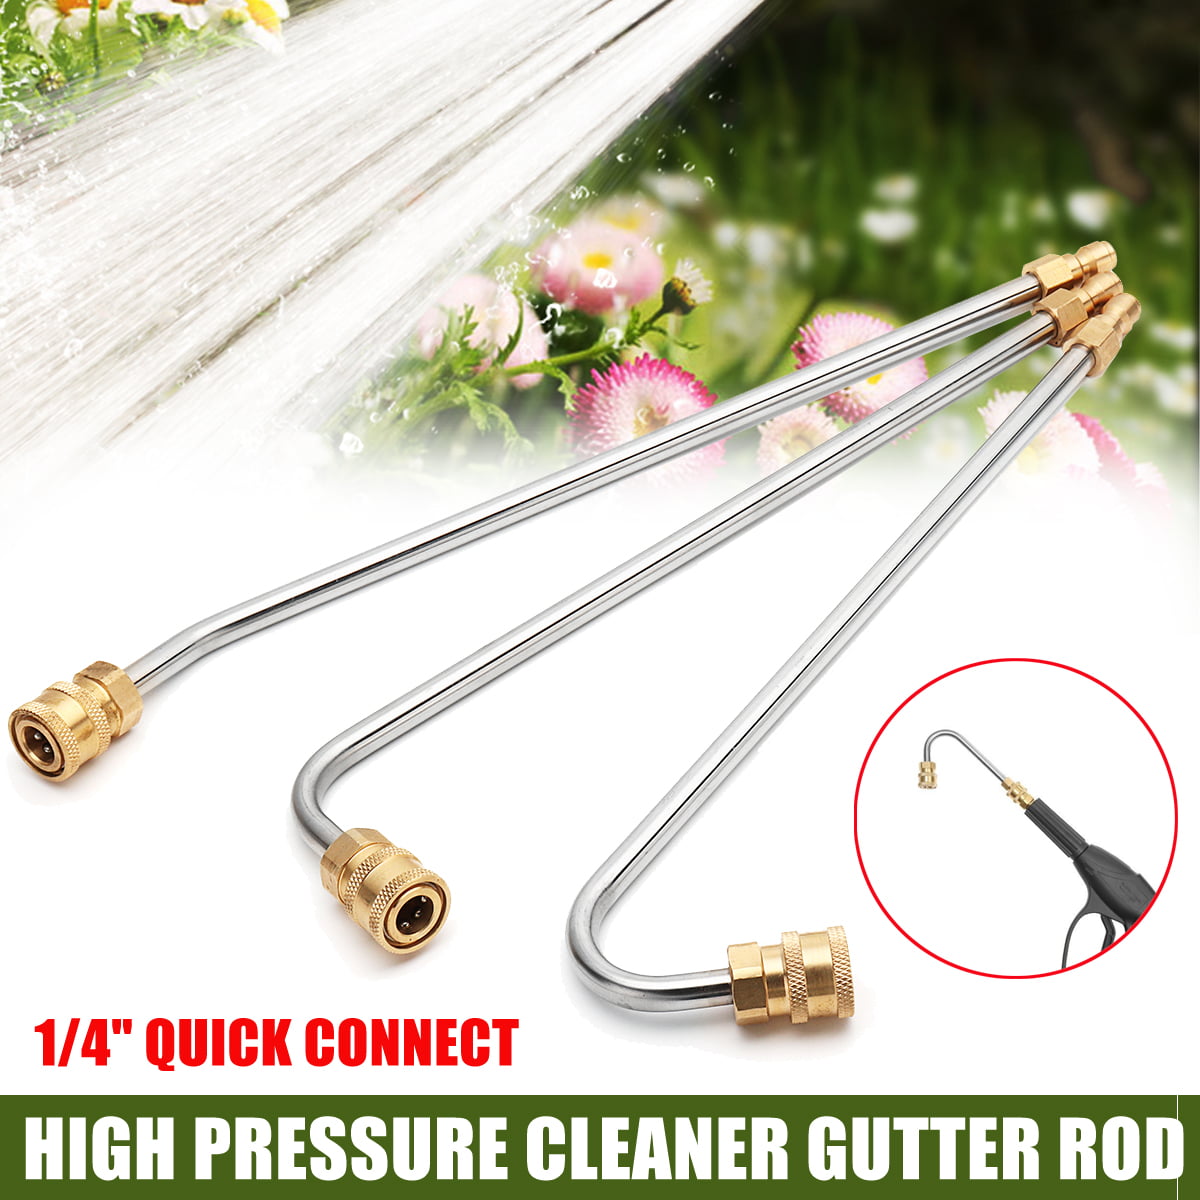 Nozzle Lance/Wand 1/4'' Quick Connect High Pressure Washer Gutter Cleaner Rod 